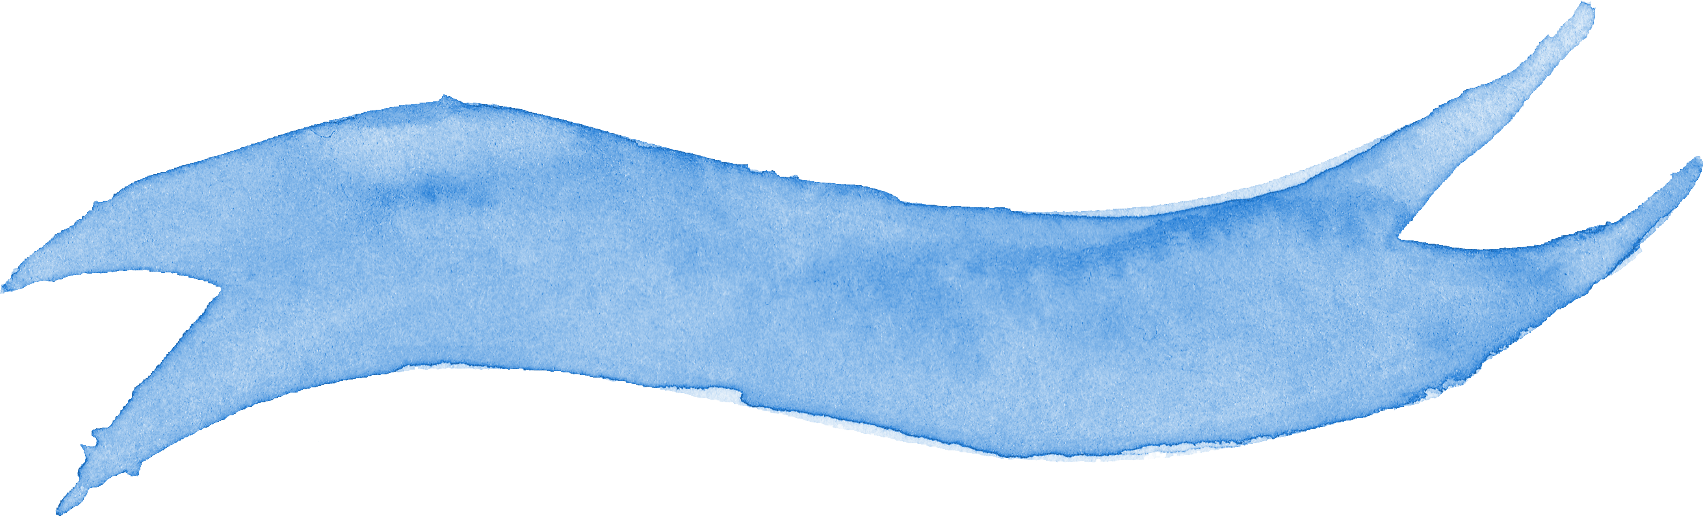 Watercolor Stain PNG Image